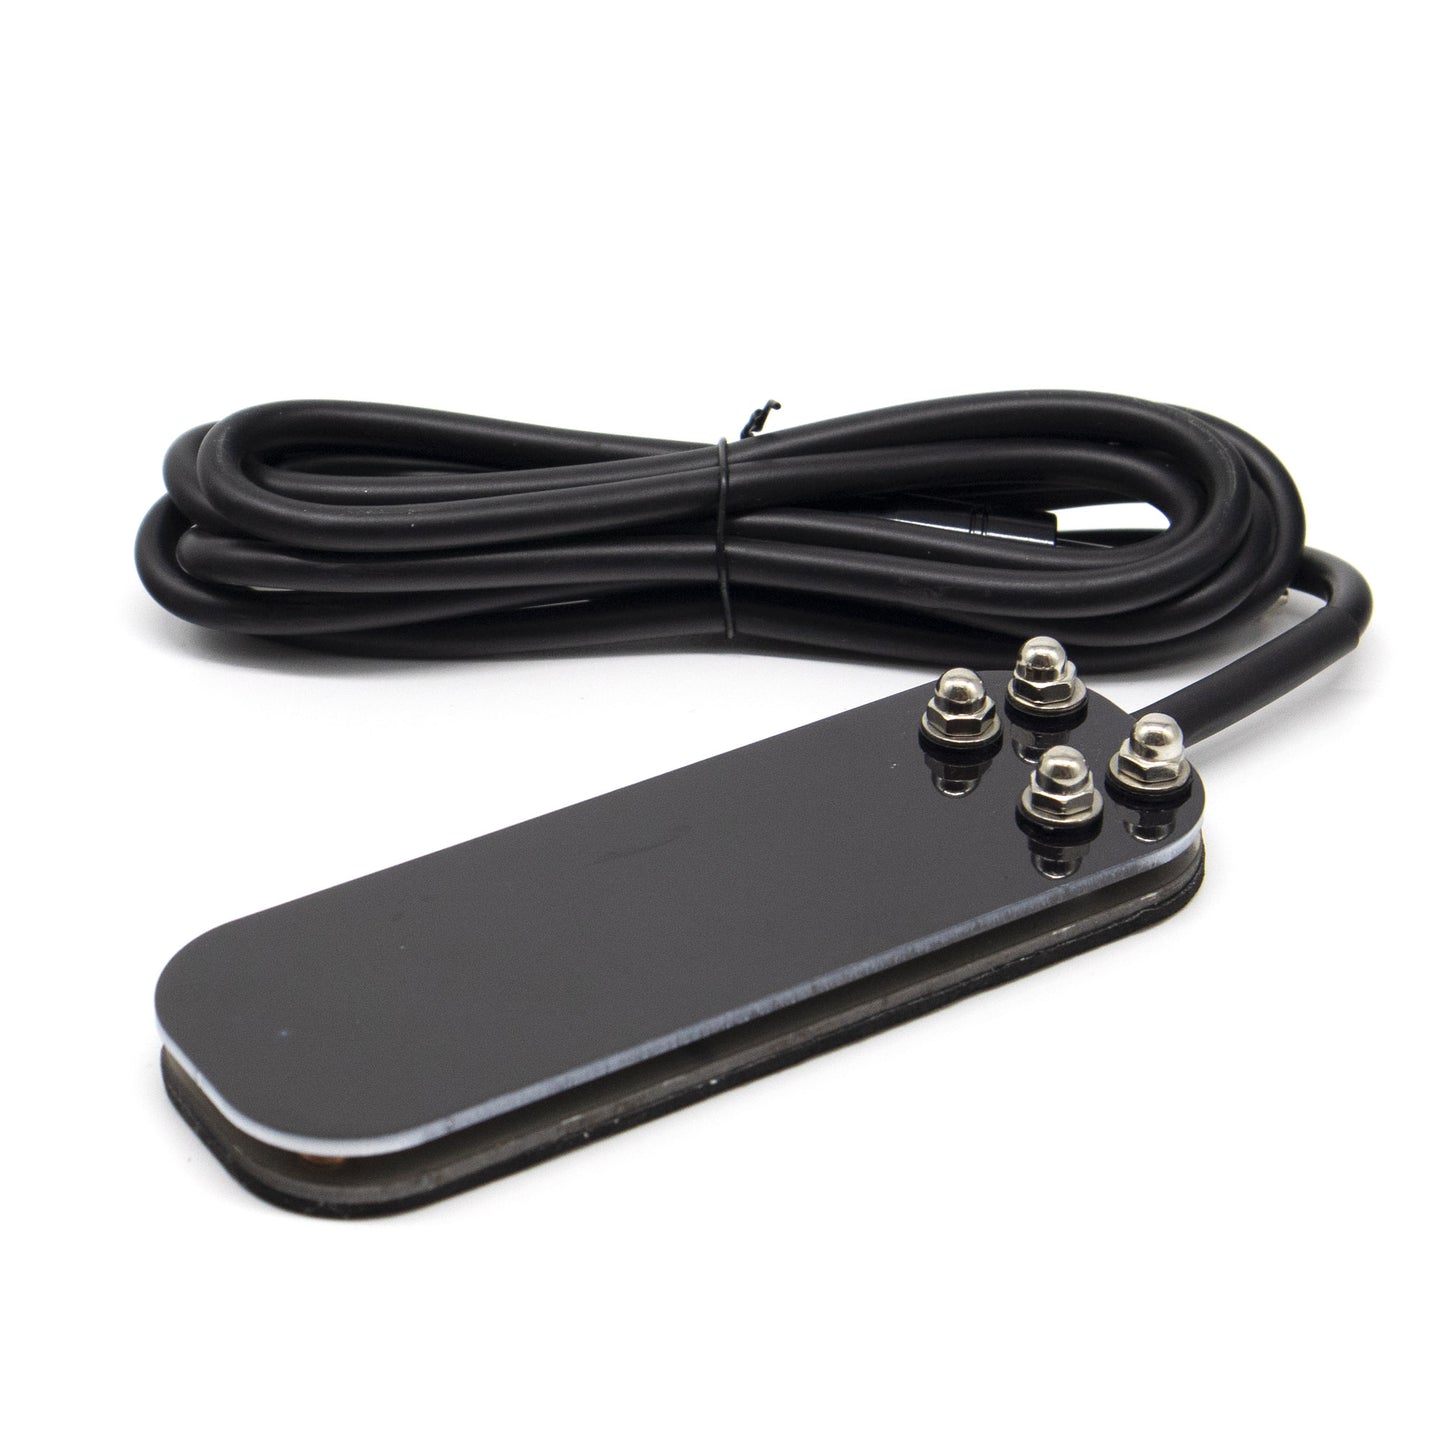 Black stainless steel foot pedal.